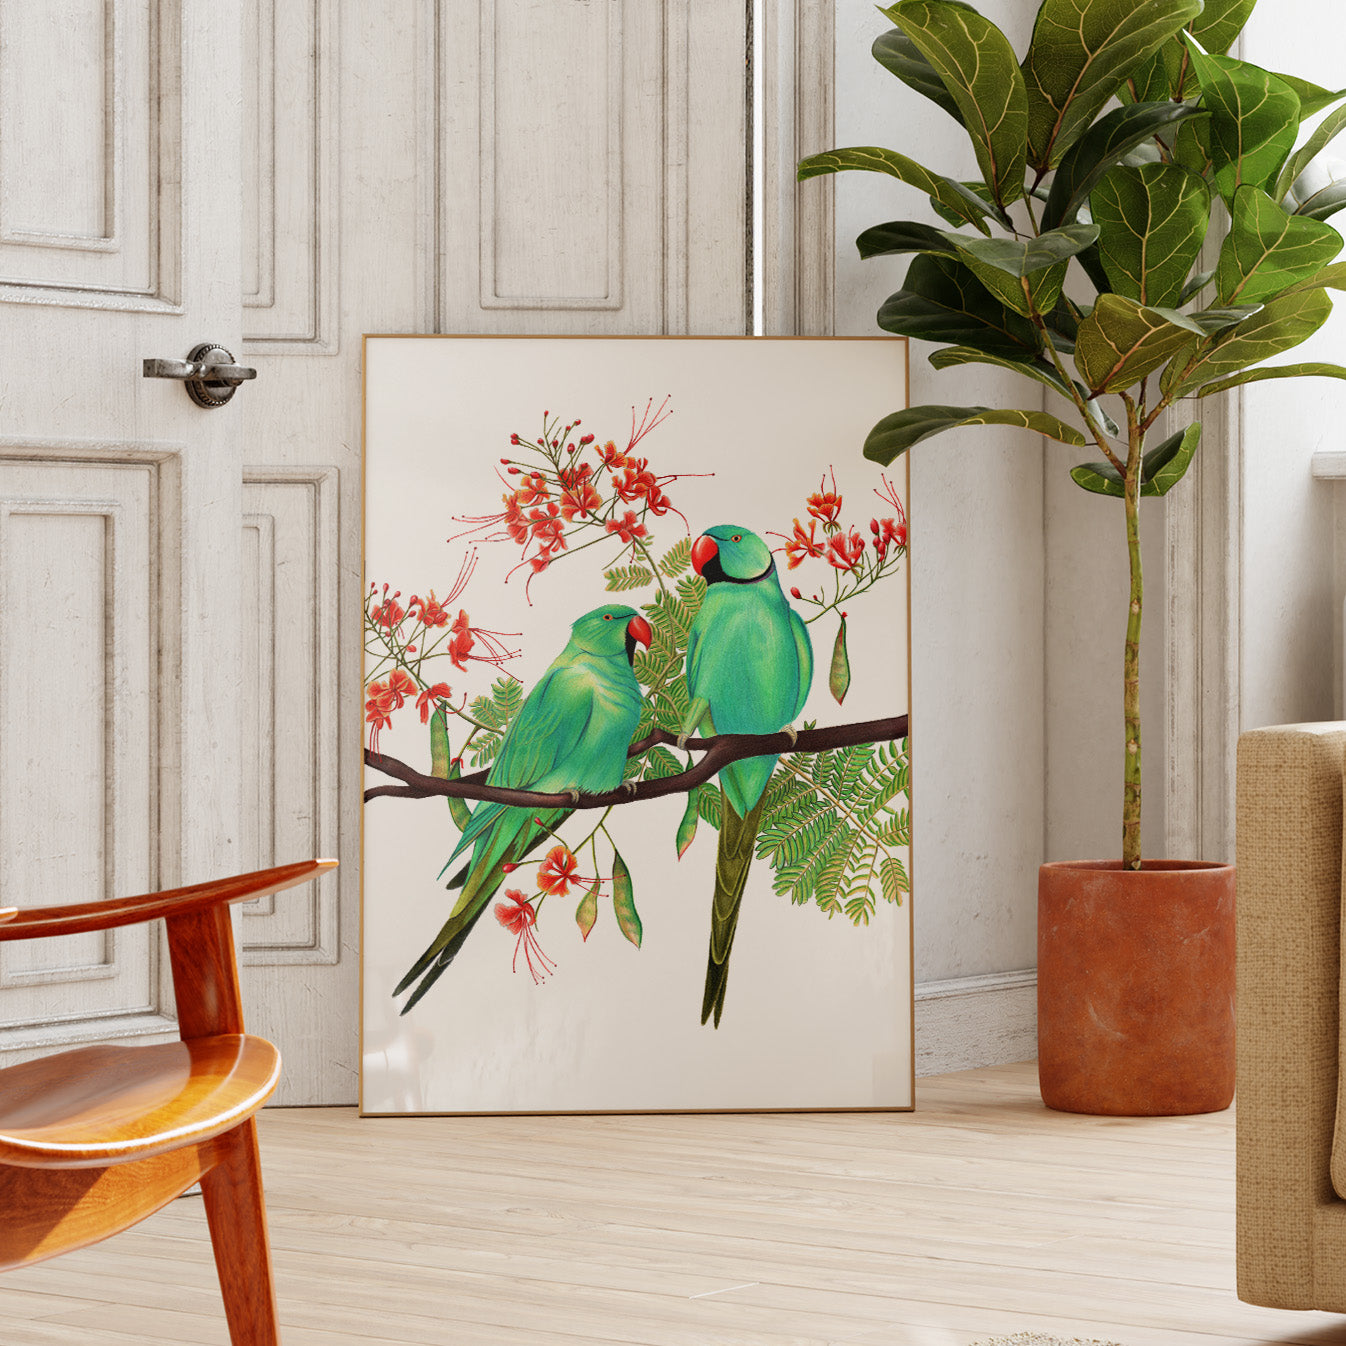 Rose-ringed parakeets in a flame tree art print